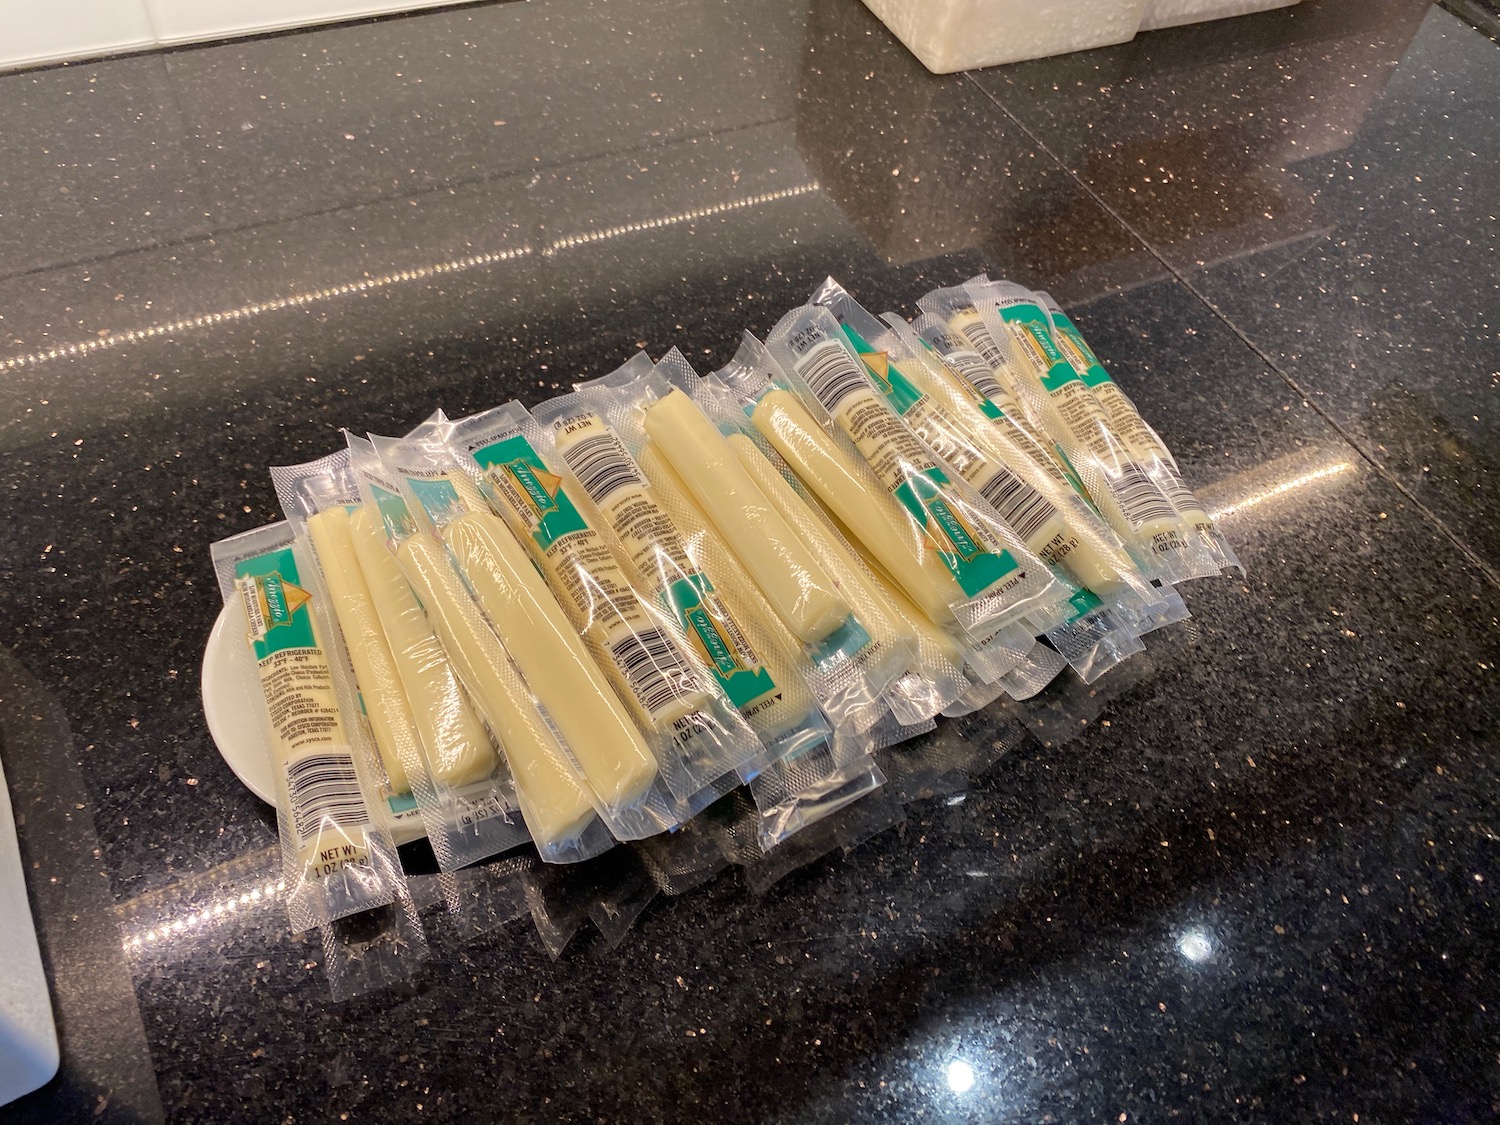 a group of packages of cheese on a counter